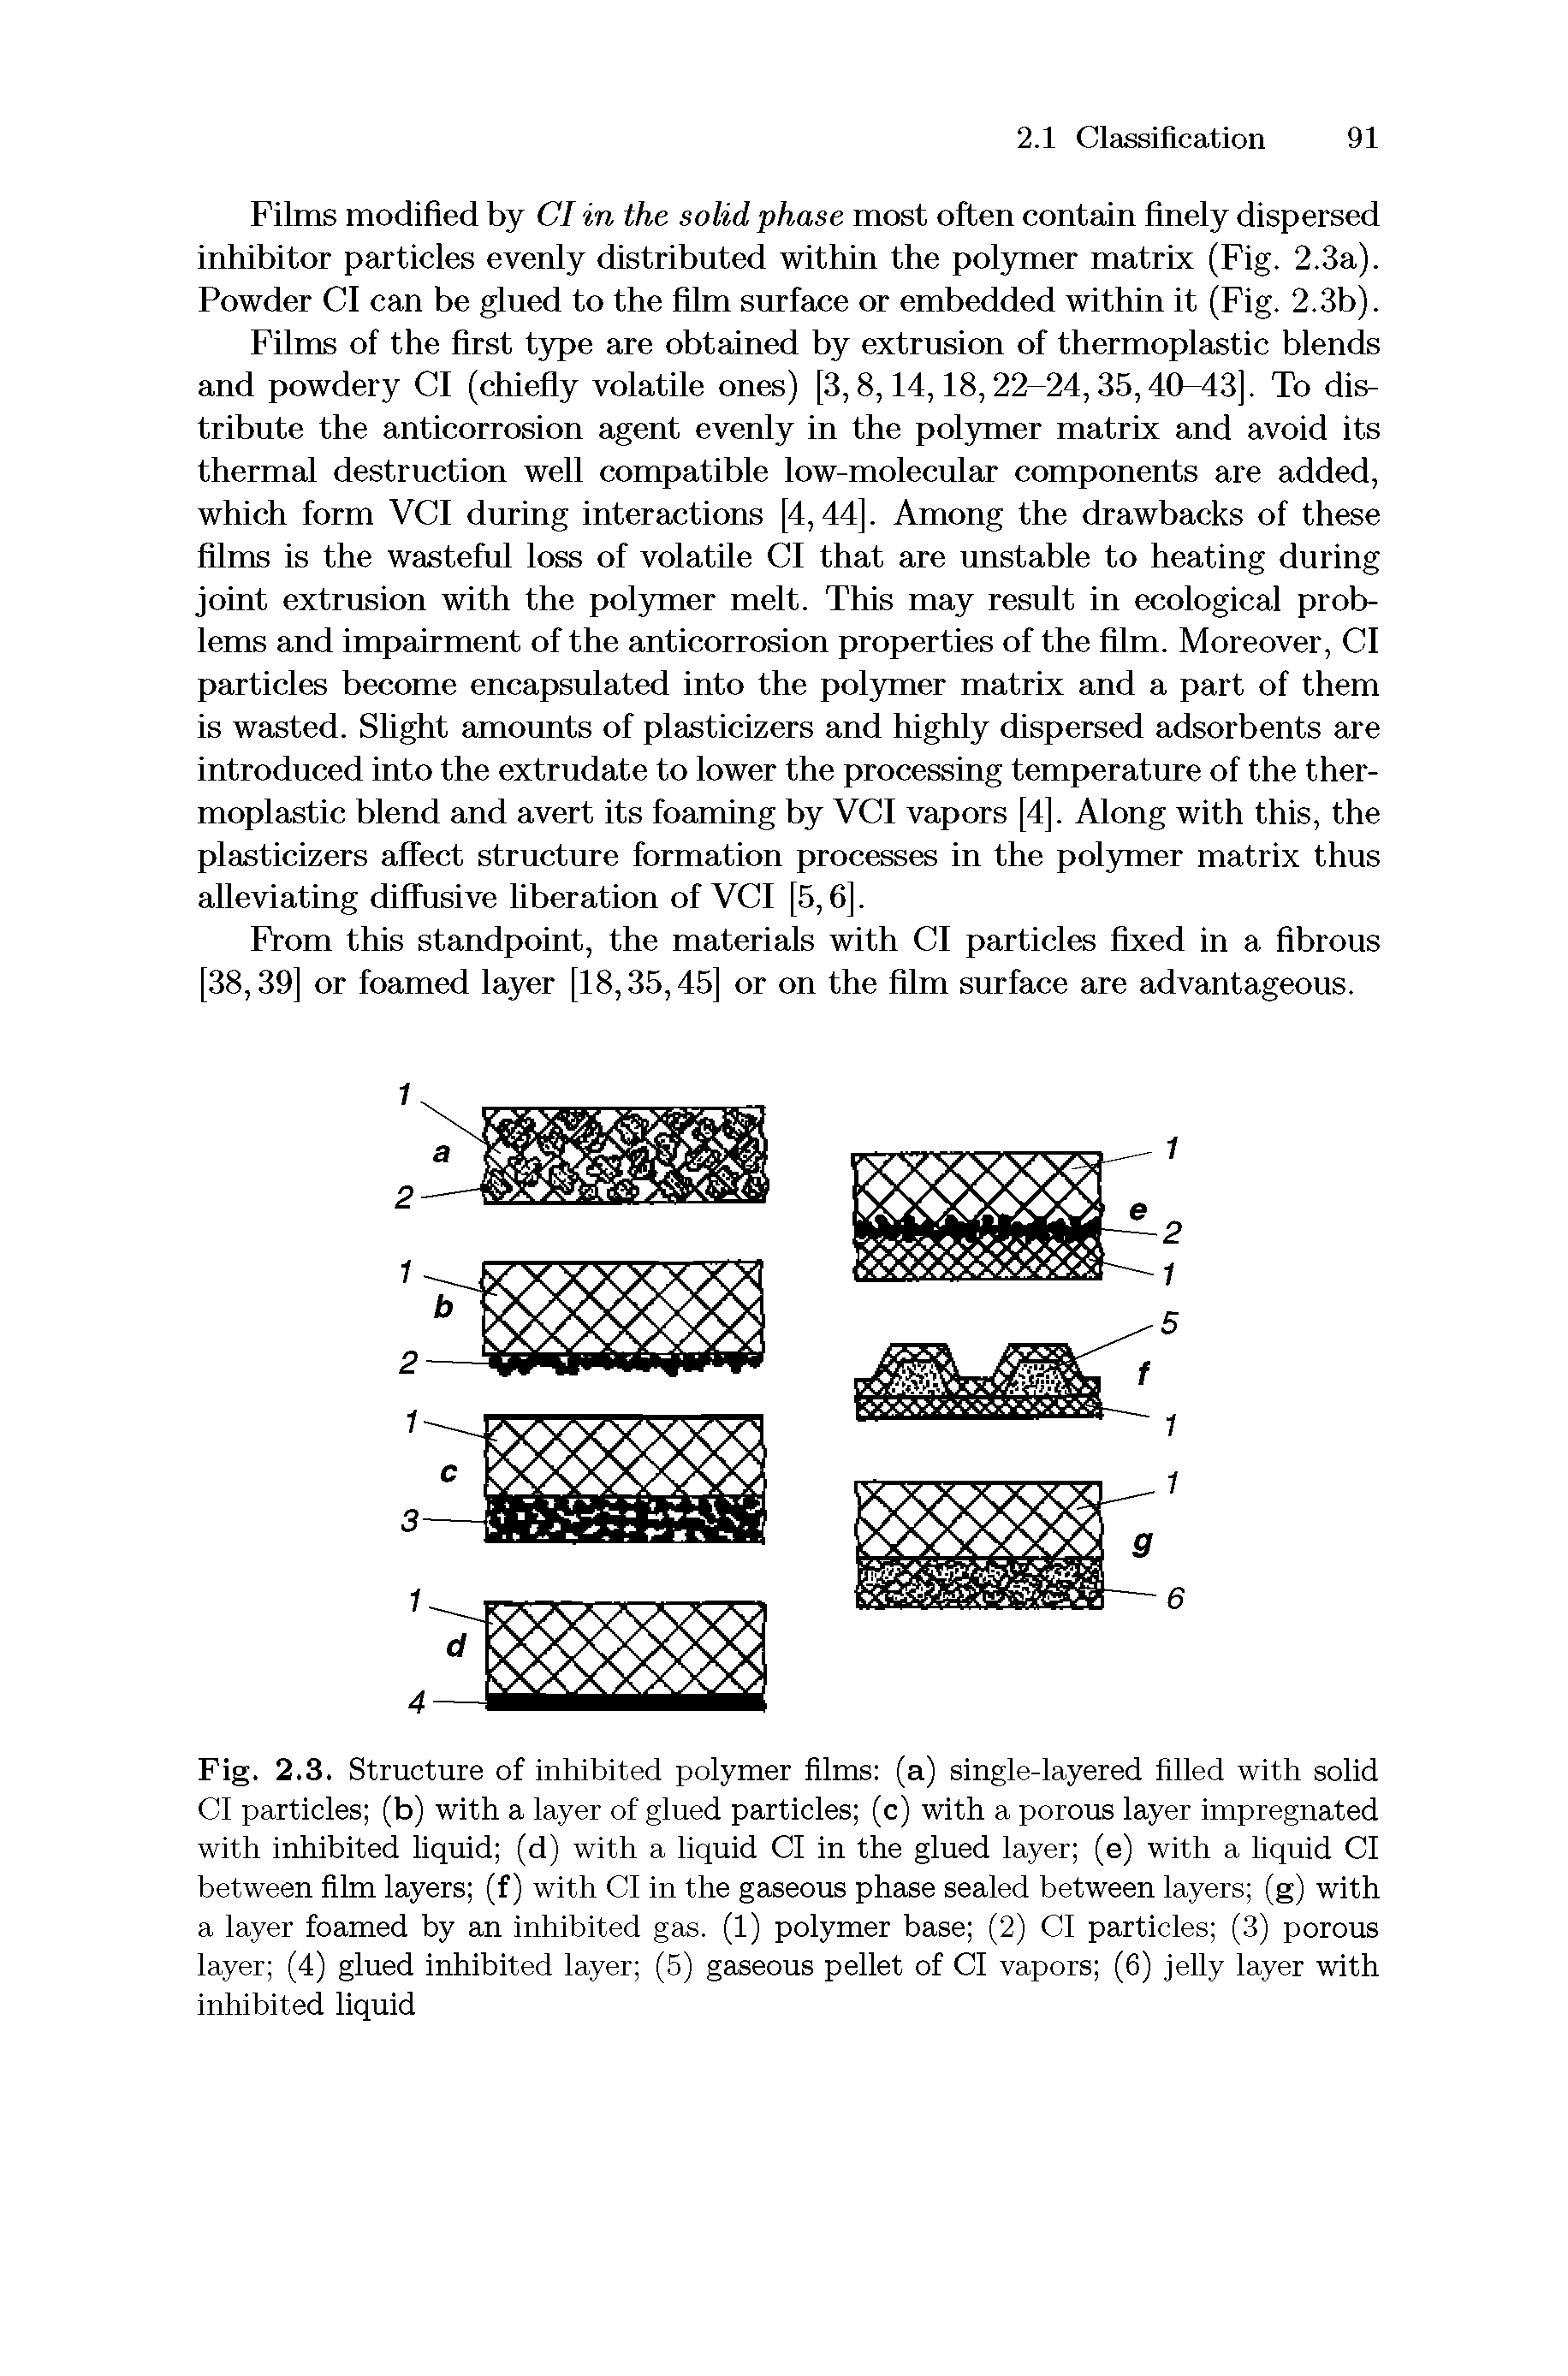 Fig. 2.3. Structure of inhibited polymer films (a) single-layered filled with solid Cl particles (b) with a layer of glued particles (c) with a porous layer impregnated with inhibited liquid (d) with a liquid Cl in the glued layer (e) with a liquid Cl between film layers (f) with Cl in the gaseous phase sealed between layers (g) with a layer foamed by an inhibited gas. (1) polymer base (2) Cl particles (3) porous layer (4) glued inhibited layer (5) gaseous pellet of Cl vapors (6) jelly layer with inhibited liquid...